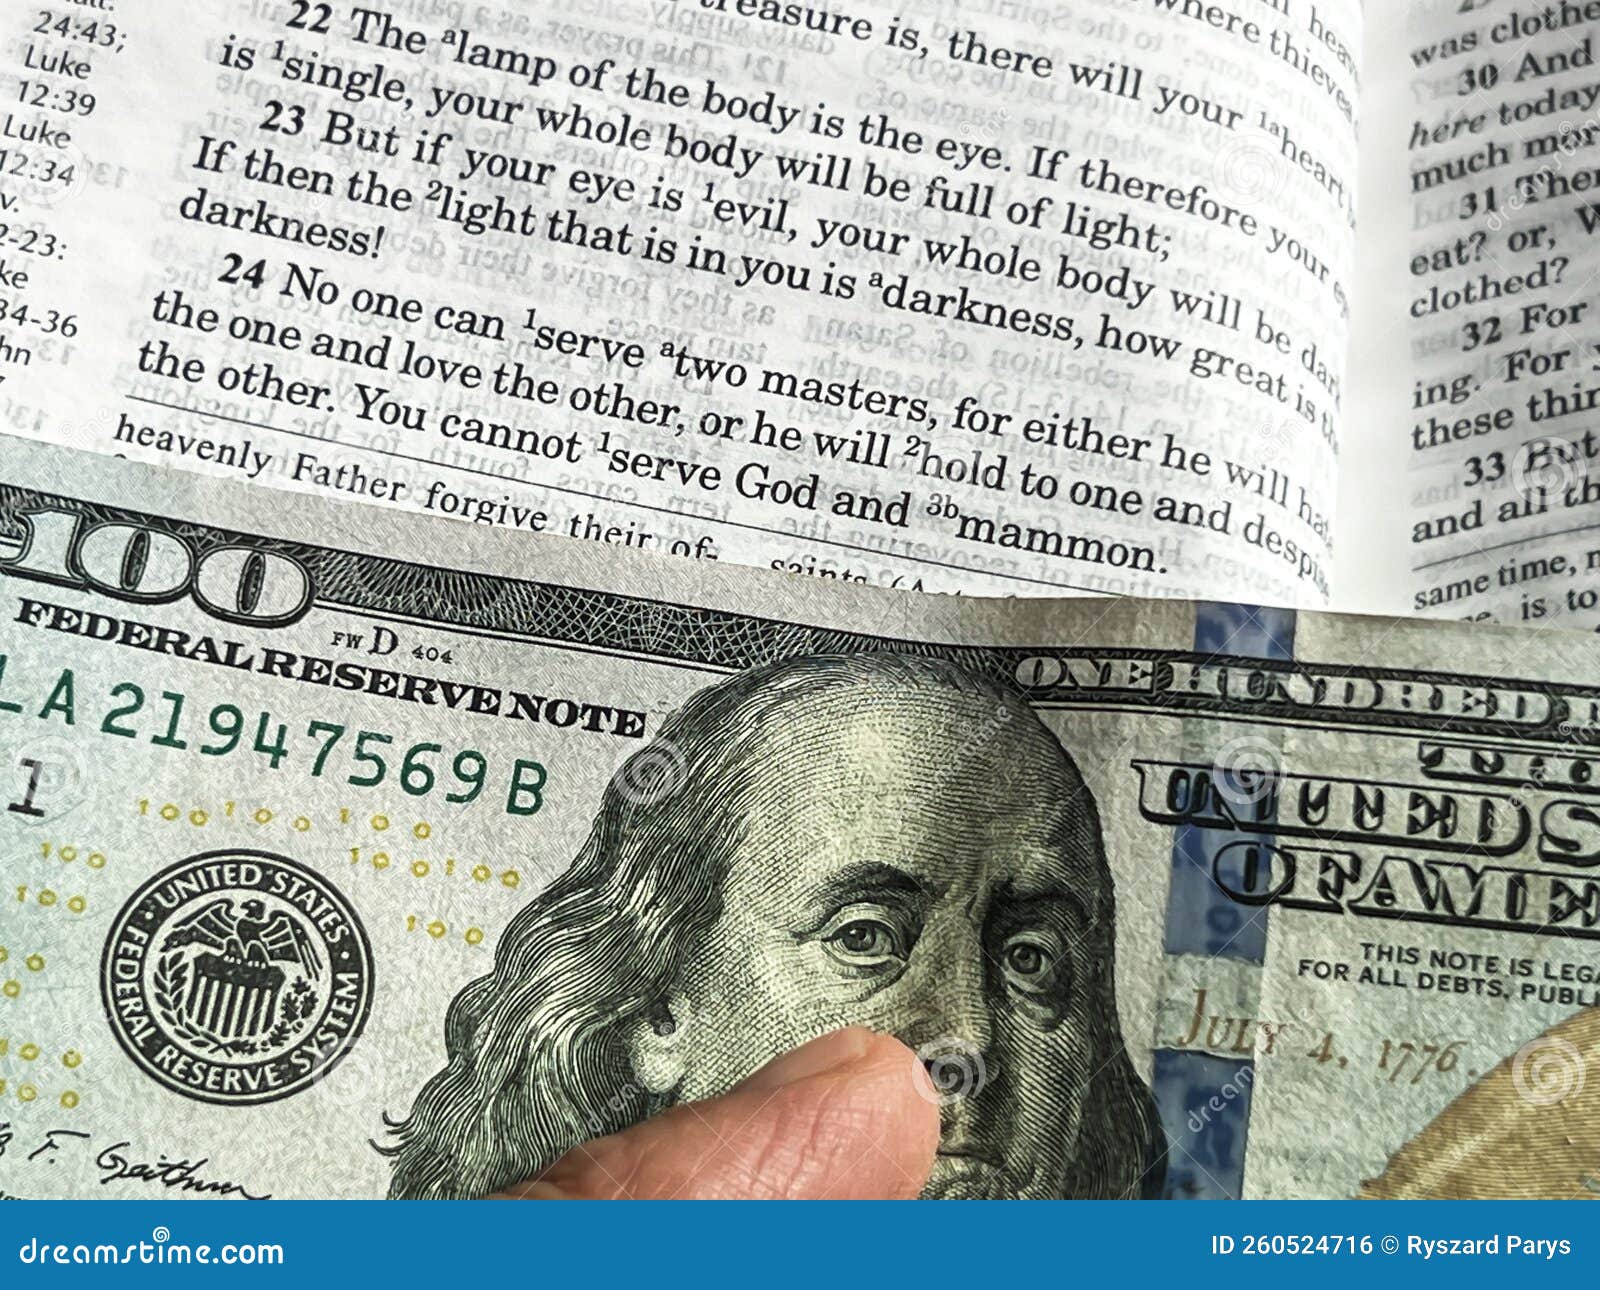 the holy bible in english with a tab from the $ 100 banknote showing a passage from the gospel according to st. matthew 6:24